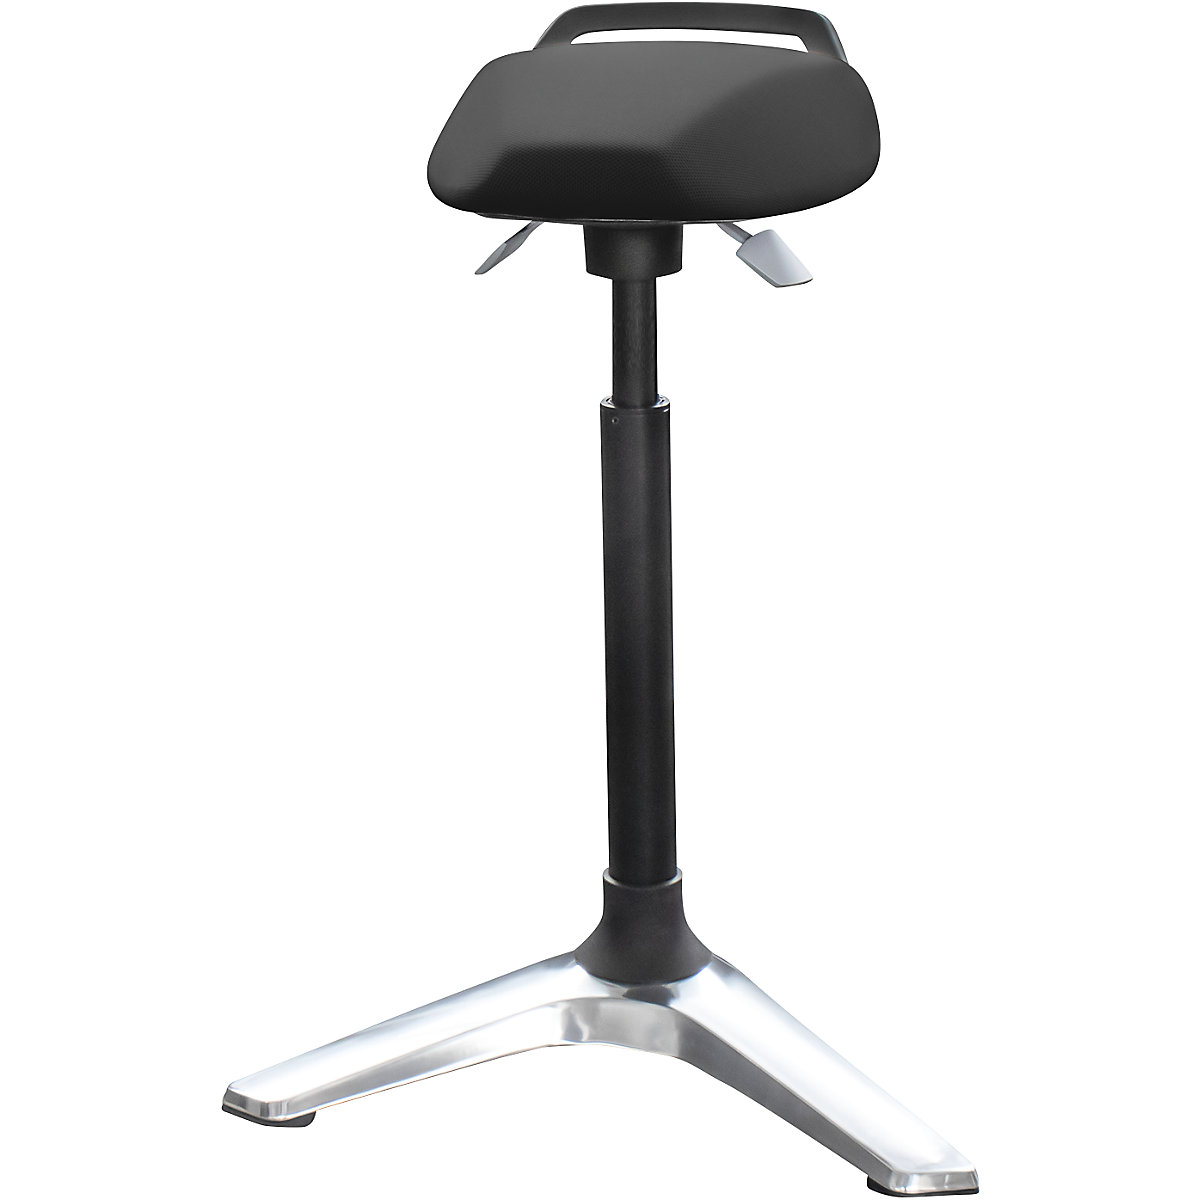 SST1 anti-fatigue stool, height adjustable 630 – 930 mm, upholstered seat, black cover-8